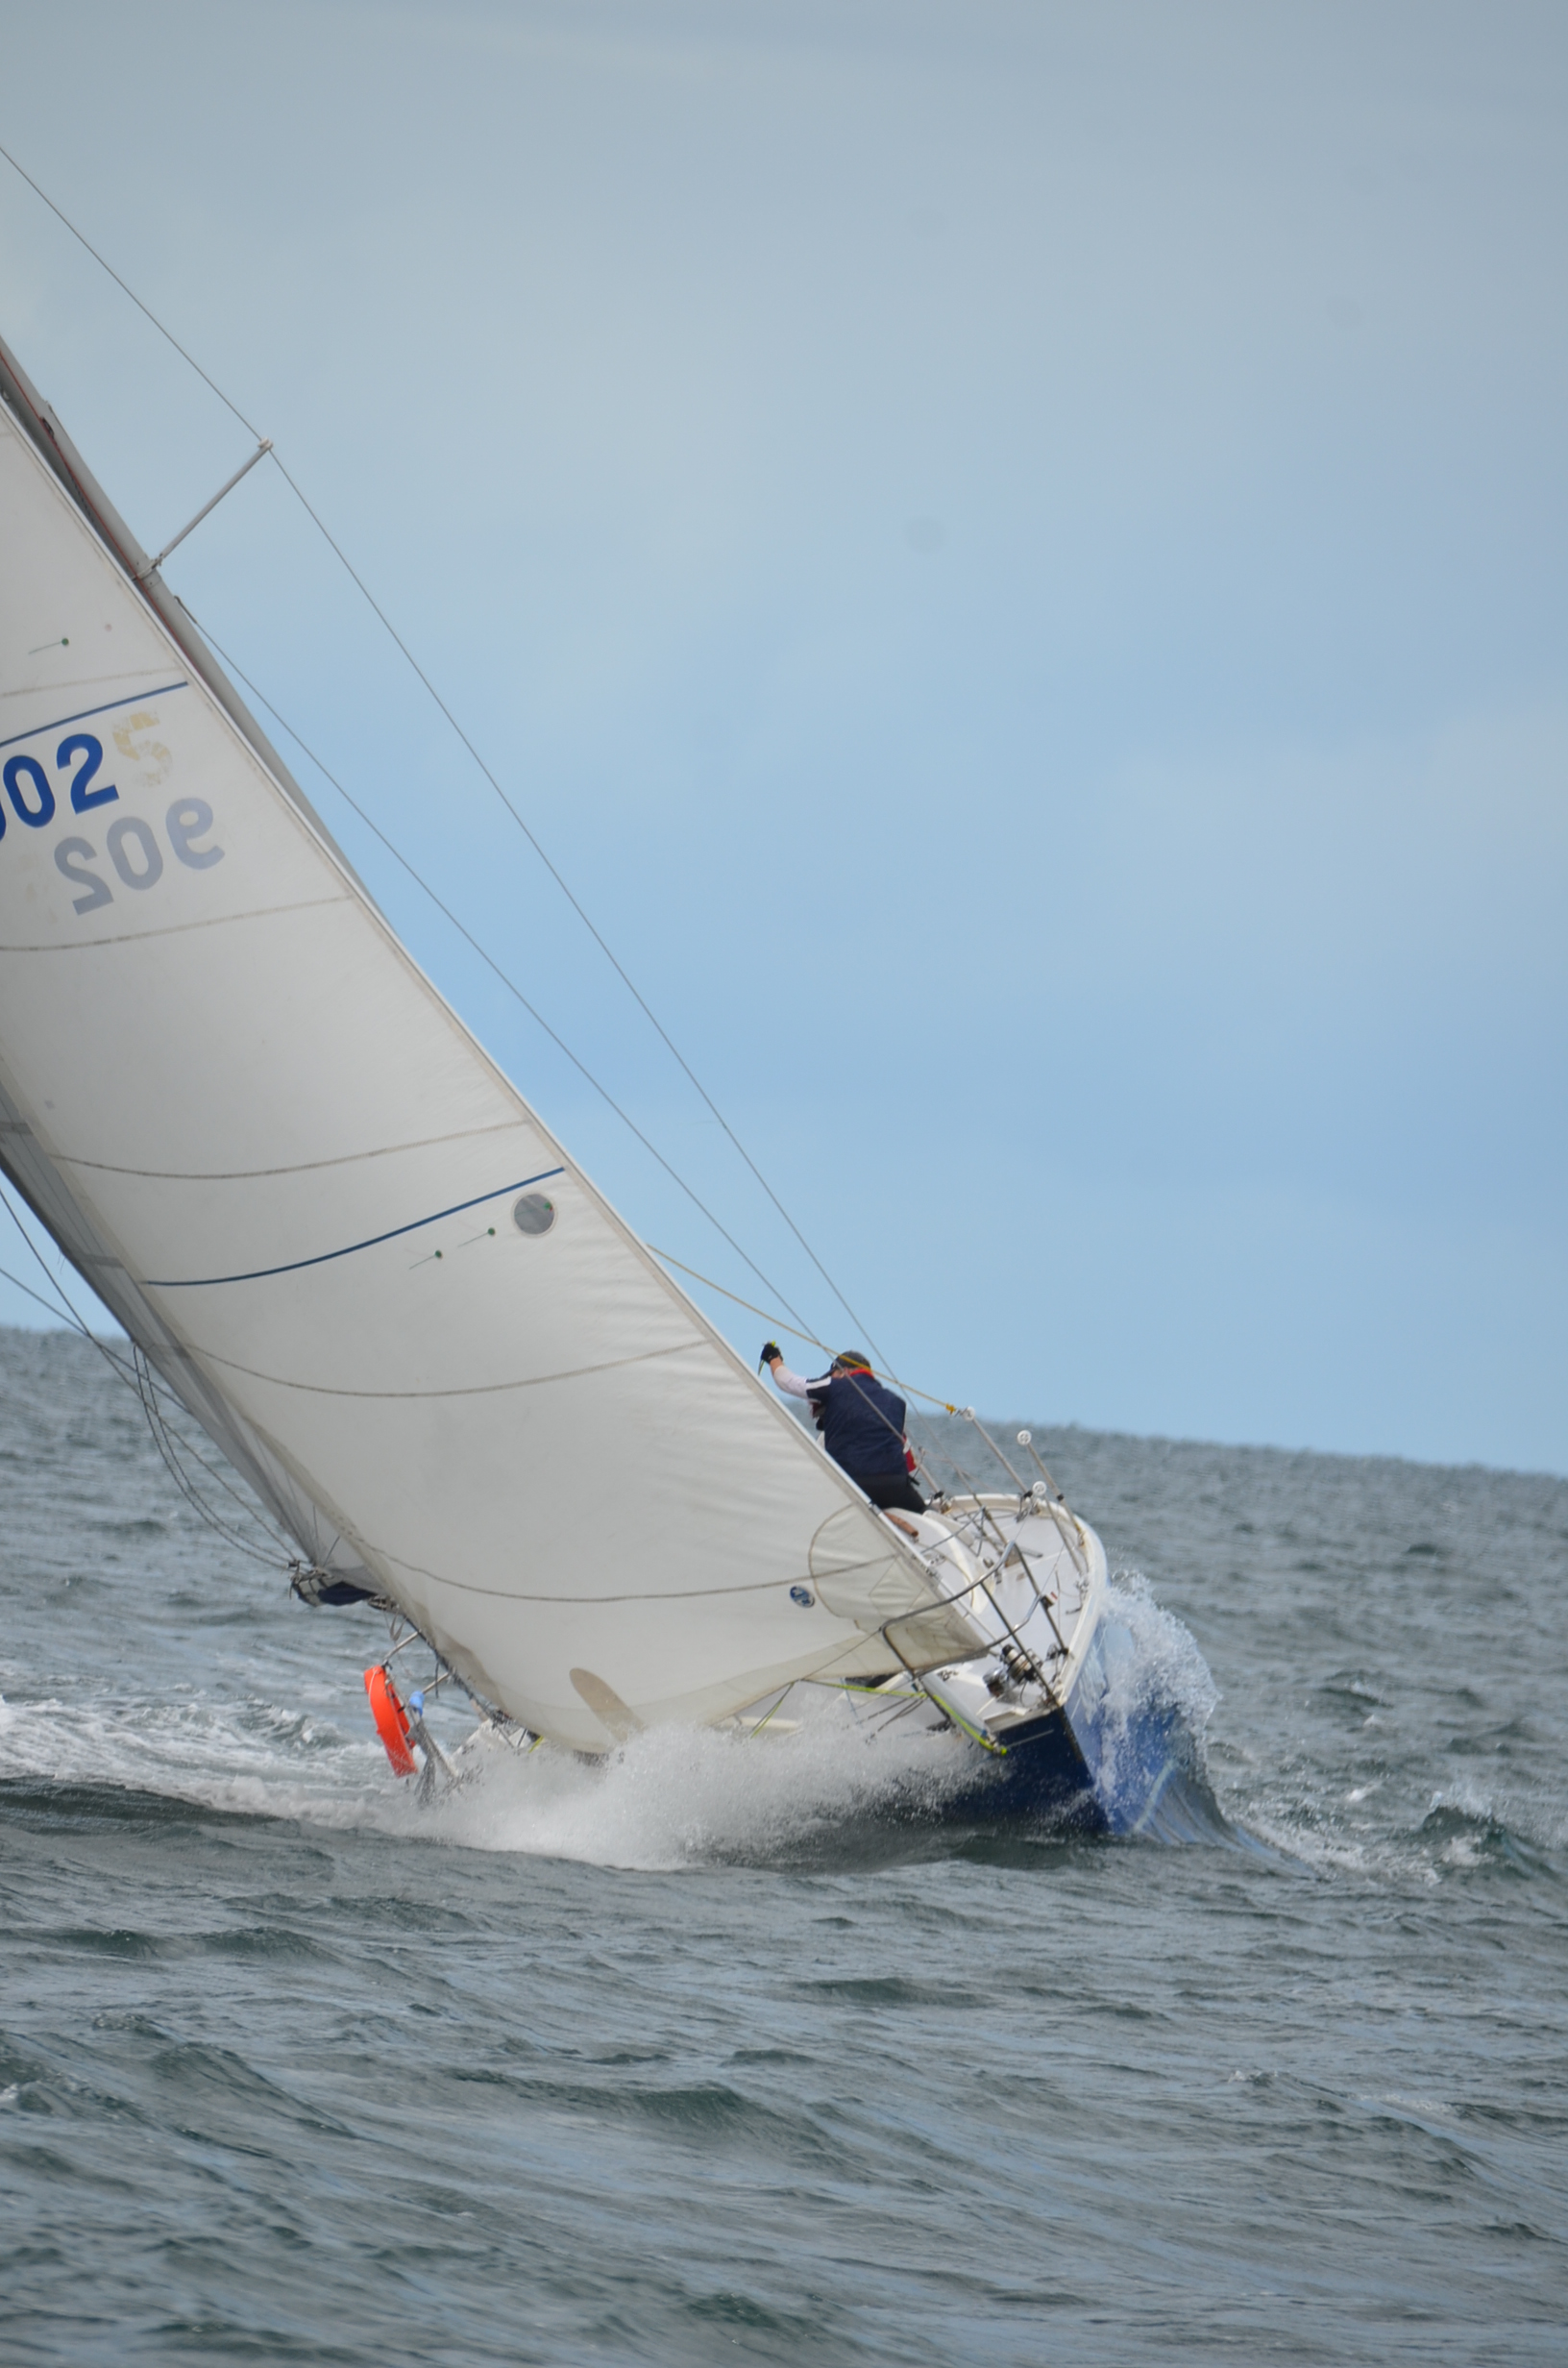 Blue Diamond finished second overall in the monohull racing division.